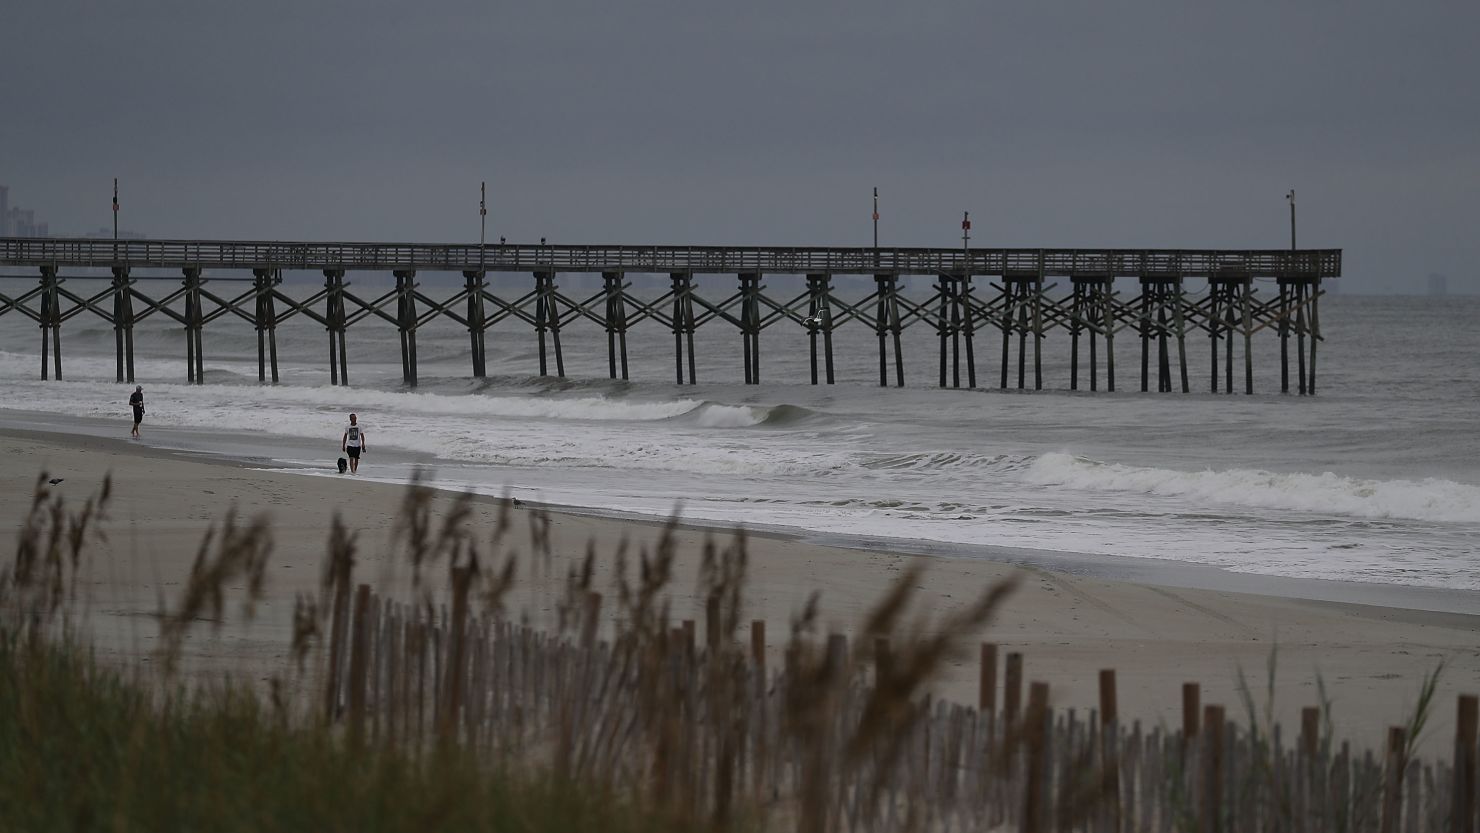 People in Myrtle Beach, South Carolina await the arrival of Hurricane Florence on September 13, 2018.